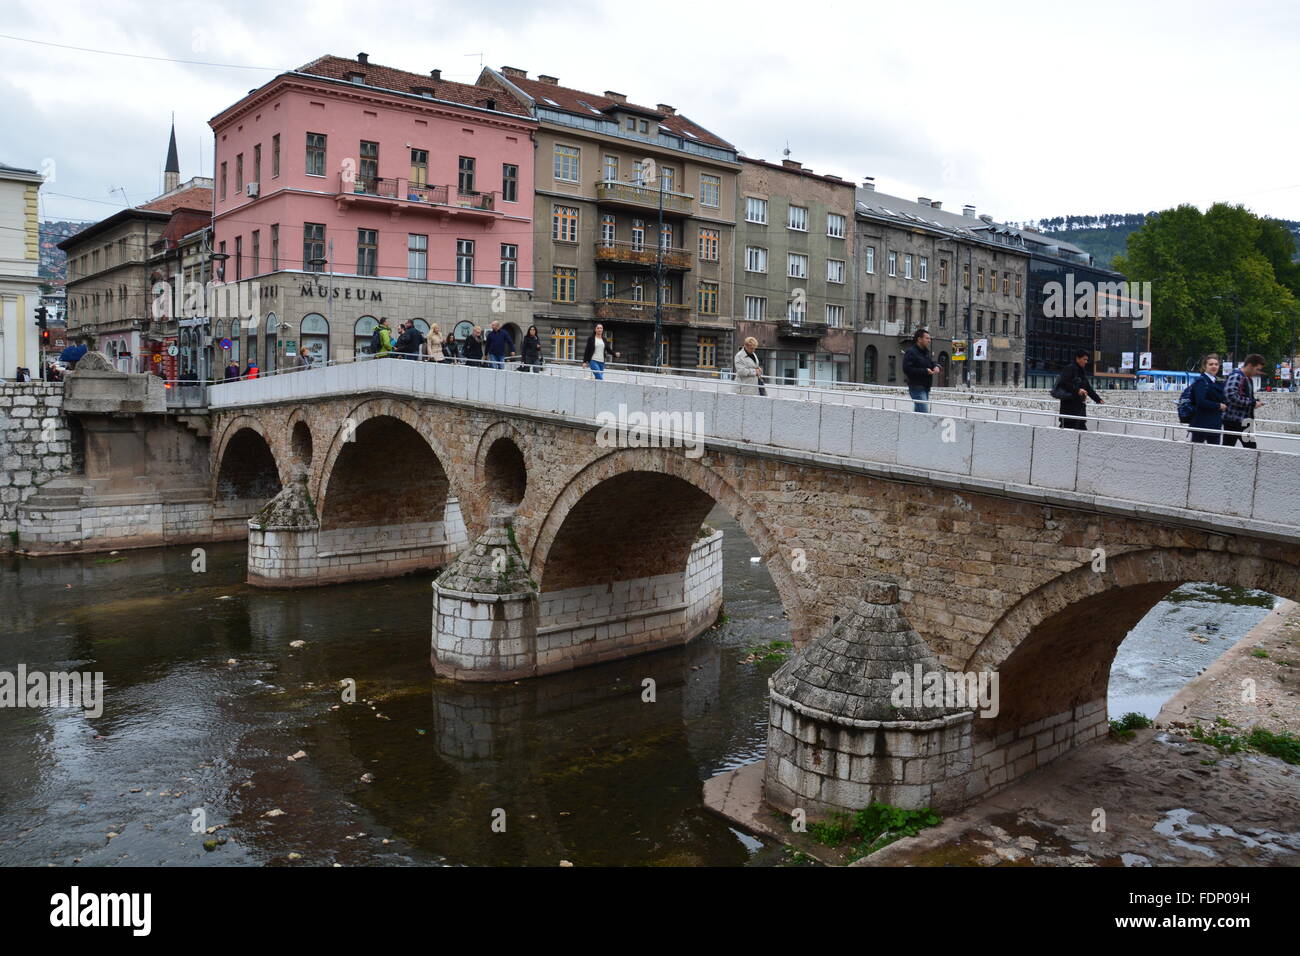 The Latin Bridge in Sarajevo was the site Franz Ferdinand was assassinated, kicking off the First World War in 1914. Stock Photo